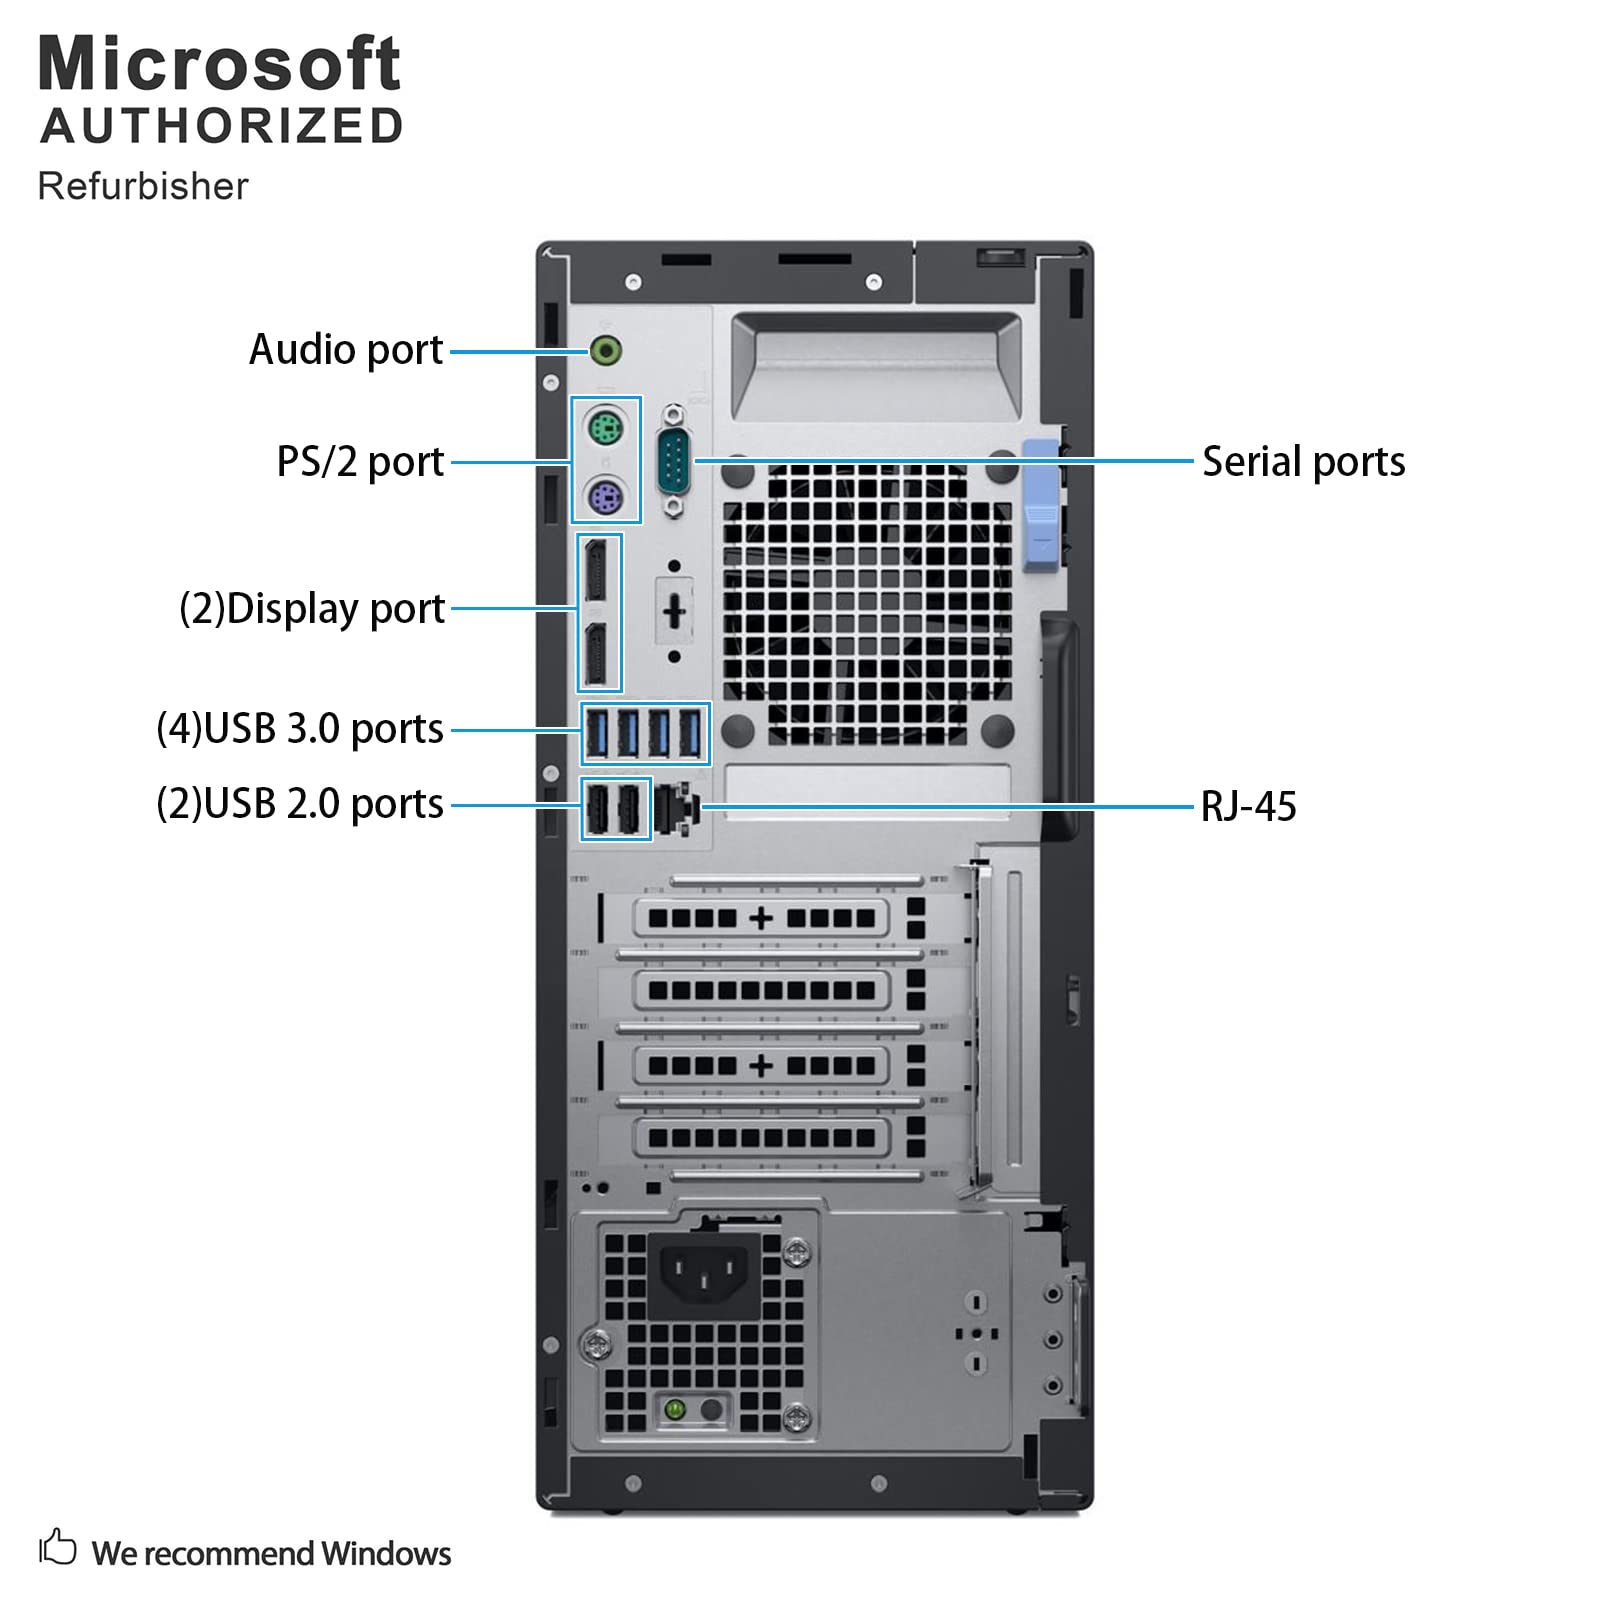 Dell OptiPlex 7060 Tower High Performance Business Desktop Computer, Intel Six Core i5-8500 up to 4.1GHz, 16G DDR4, 1T, WiFi, BT, 4K Support, DP, Windows 10 Pro 64 English/Spanish/French(Renewed)